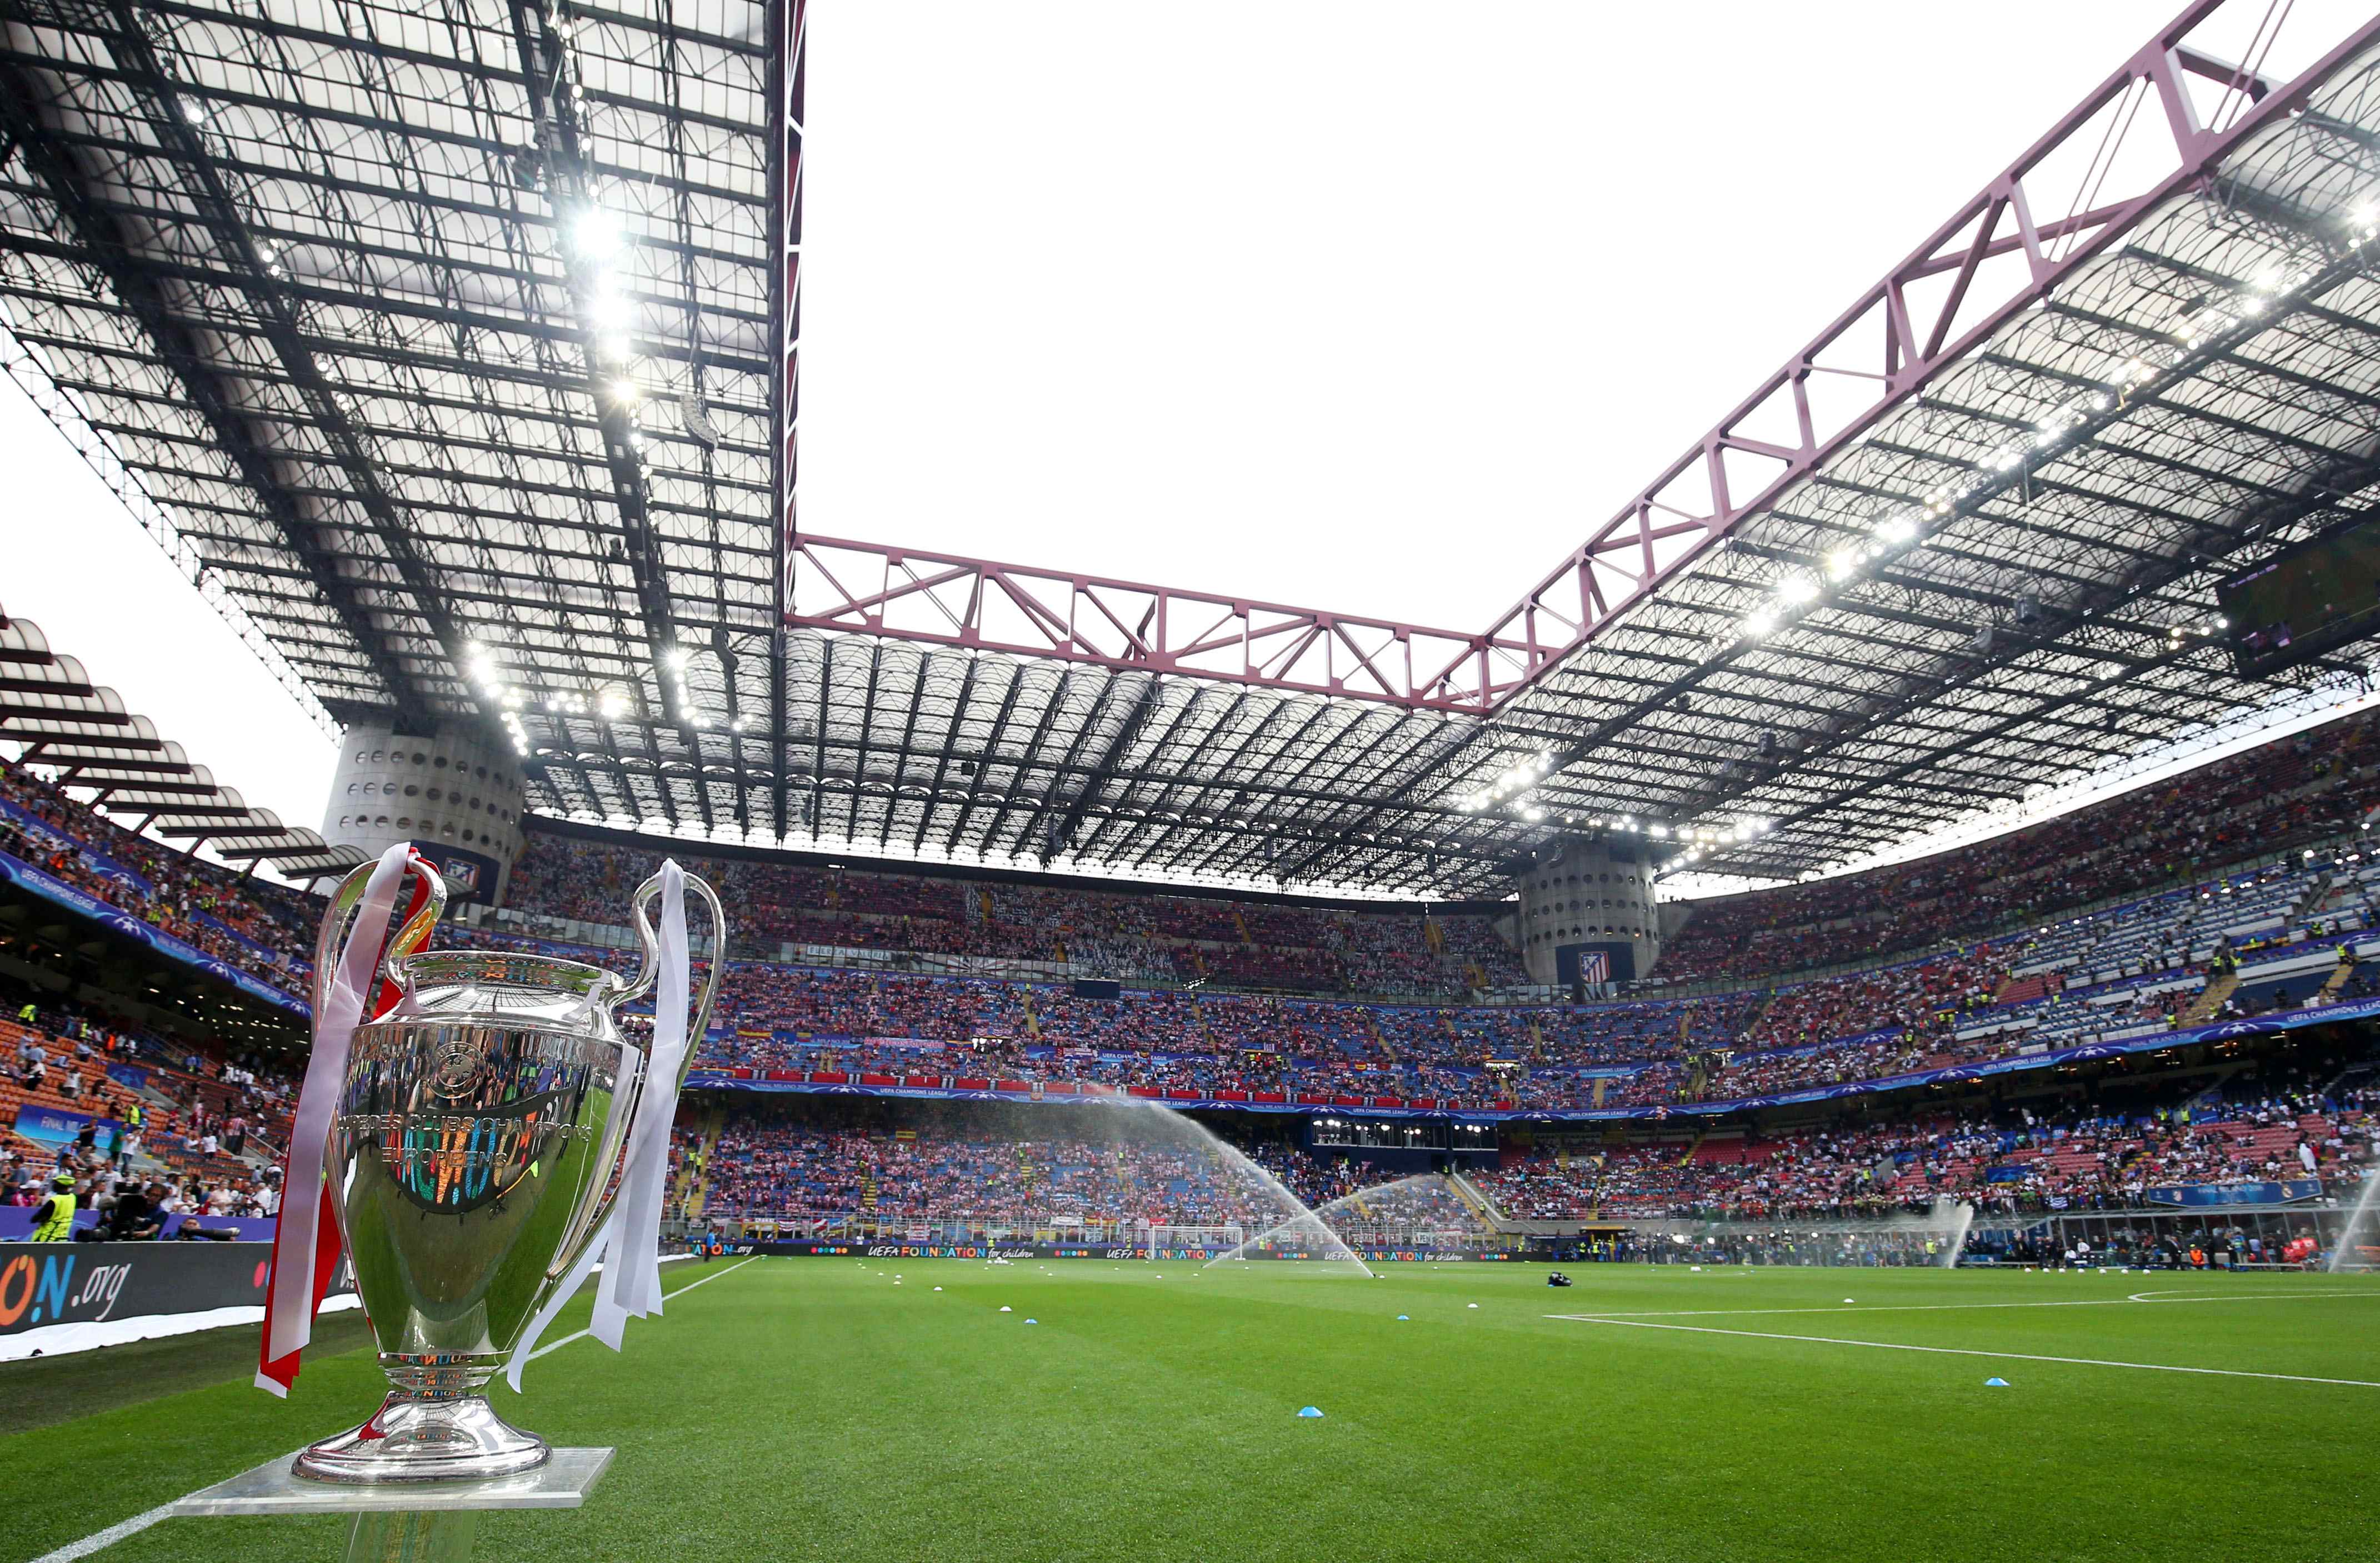 The Champions League trophy on display ahead of the UEFA Champions League final between Real Madrid and Atletico Madrid played at the Giuseppe Meazza Stadium (San Siro), Milan, Italy on May 28th 2016 Photo : McManus / Bpi / Icon Sport *** Local Caption ***